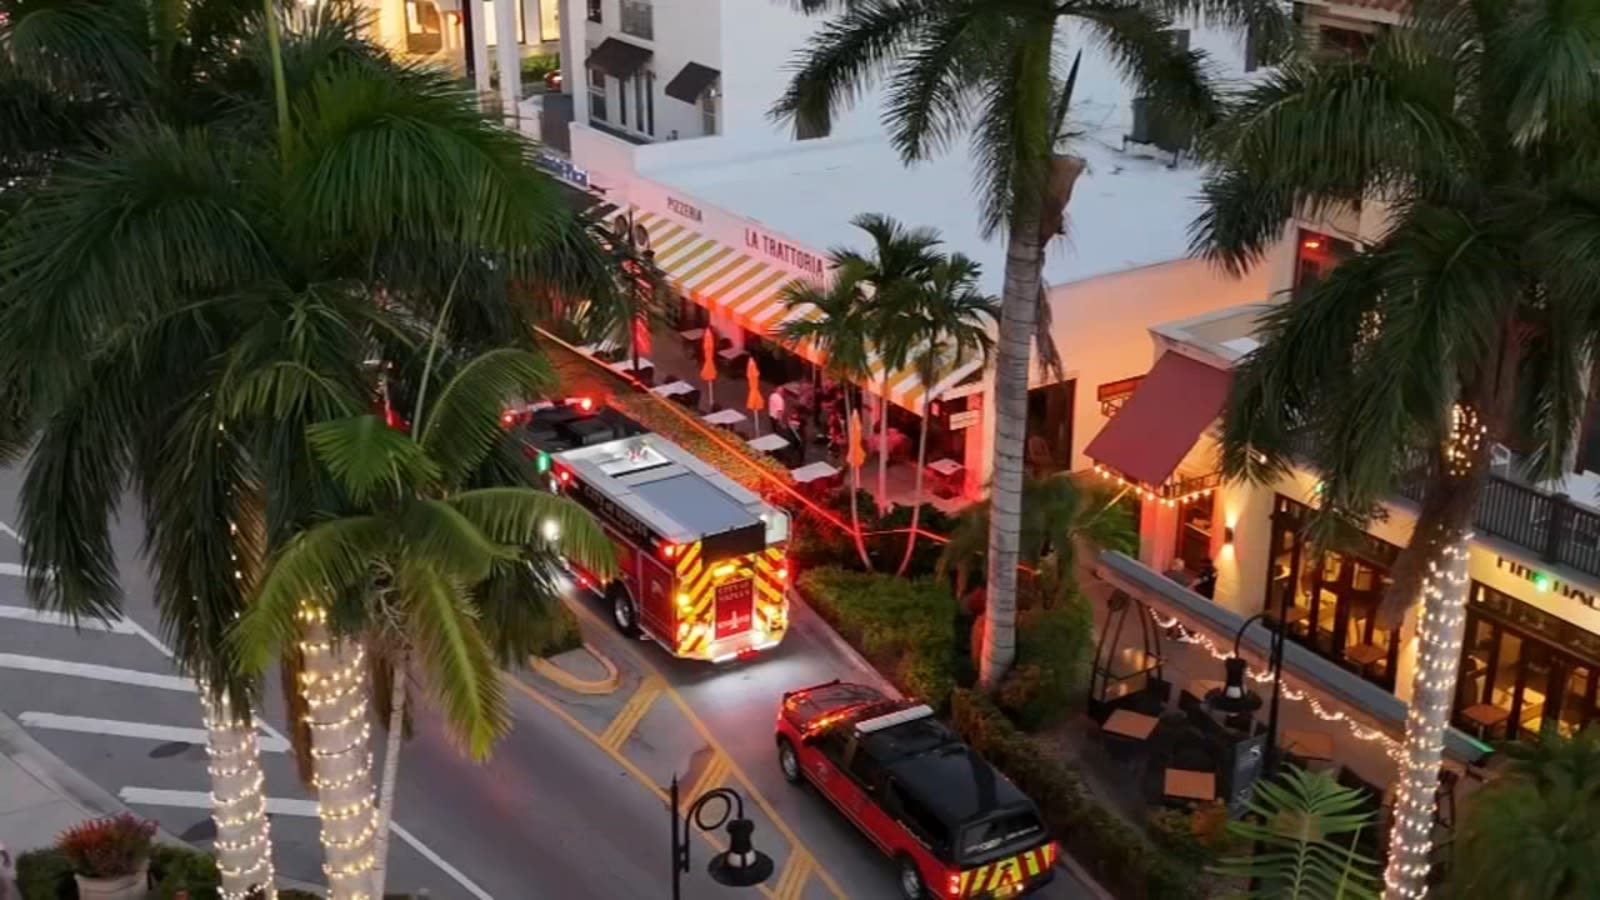 9 injured in Naples, Florida restaurant roof collapse